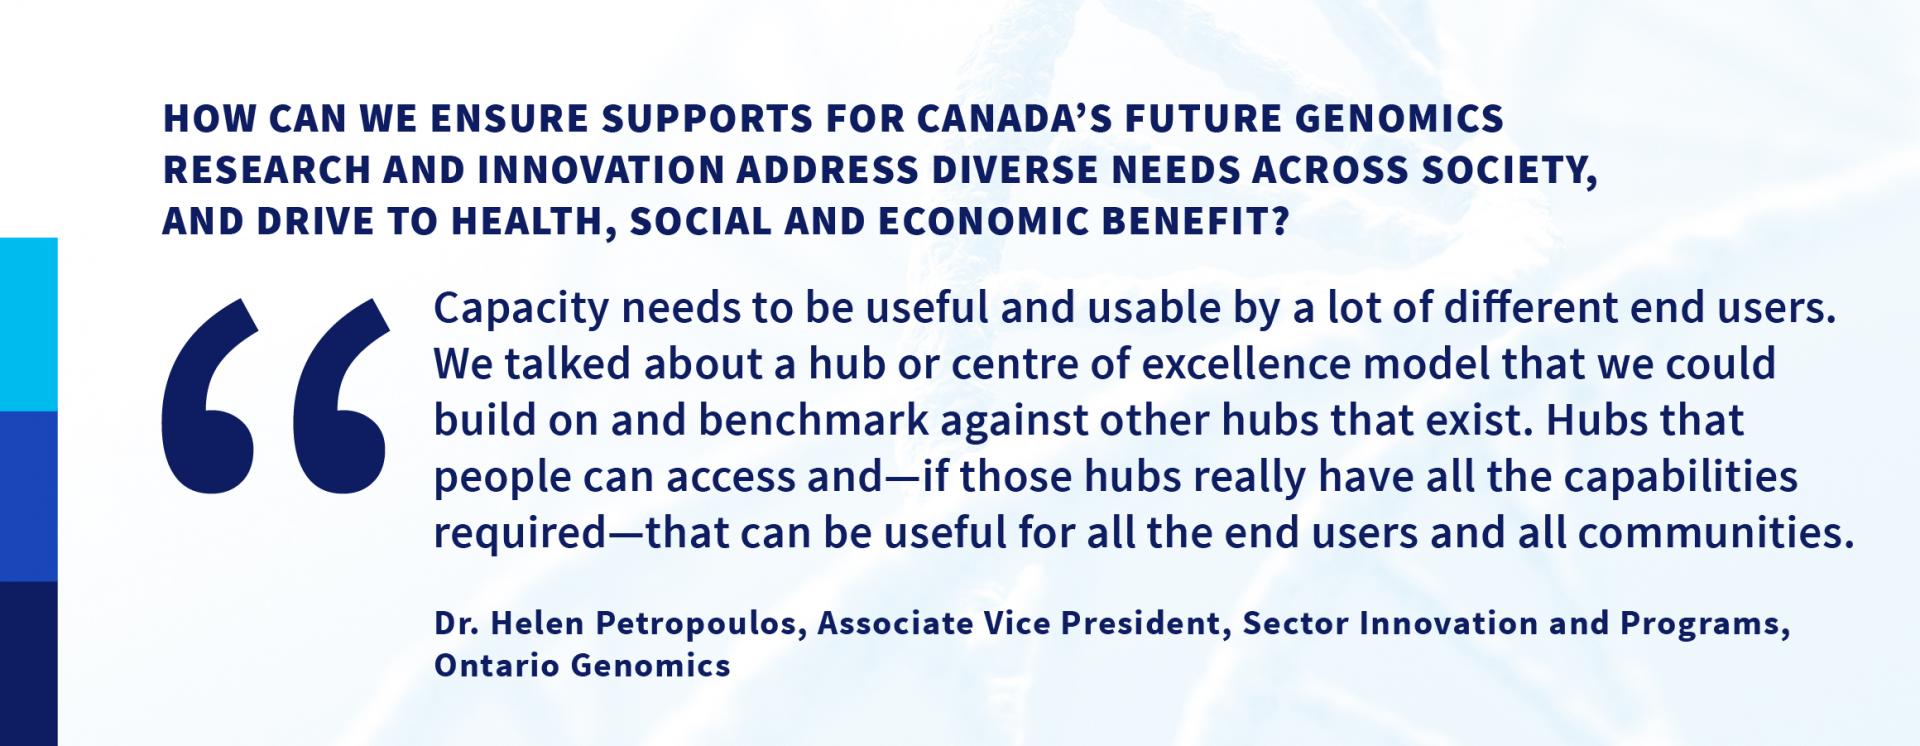 How can we ensure supports for Canada’s future genomics research and innovation address diverse needs across society, and drive to health, social and economic benefit? “Capacity needs to be useful and usable by a lot of different end users. We talked about a hub or centre of excellence model that we could build on and benchmark against other hubs that exist. Hubs that people can access and—if those hubs really have all the capabilities required—that can be useful for all the end users and all communities.”—Dr. Helen Petropoulos, Associate Vice President, Sector Innovation and Programs, Ontario Genomics